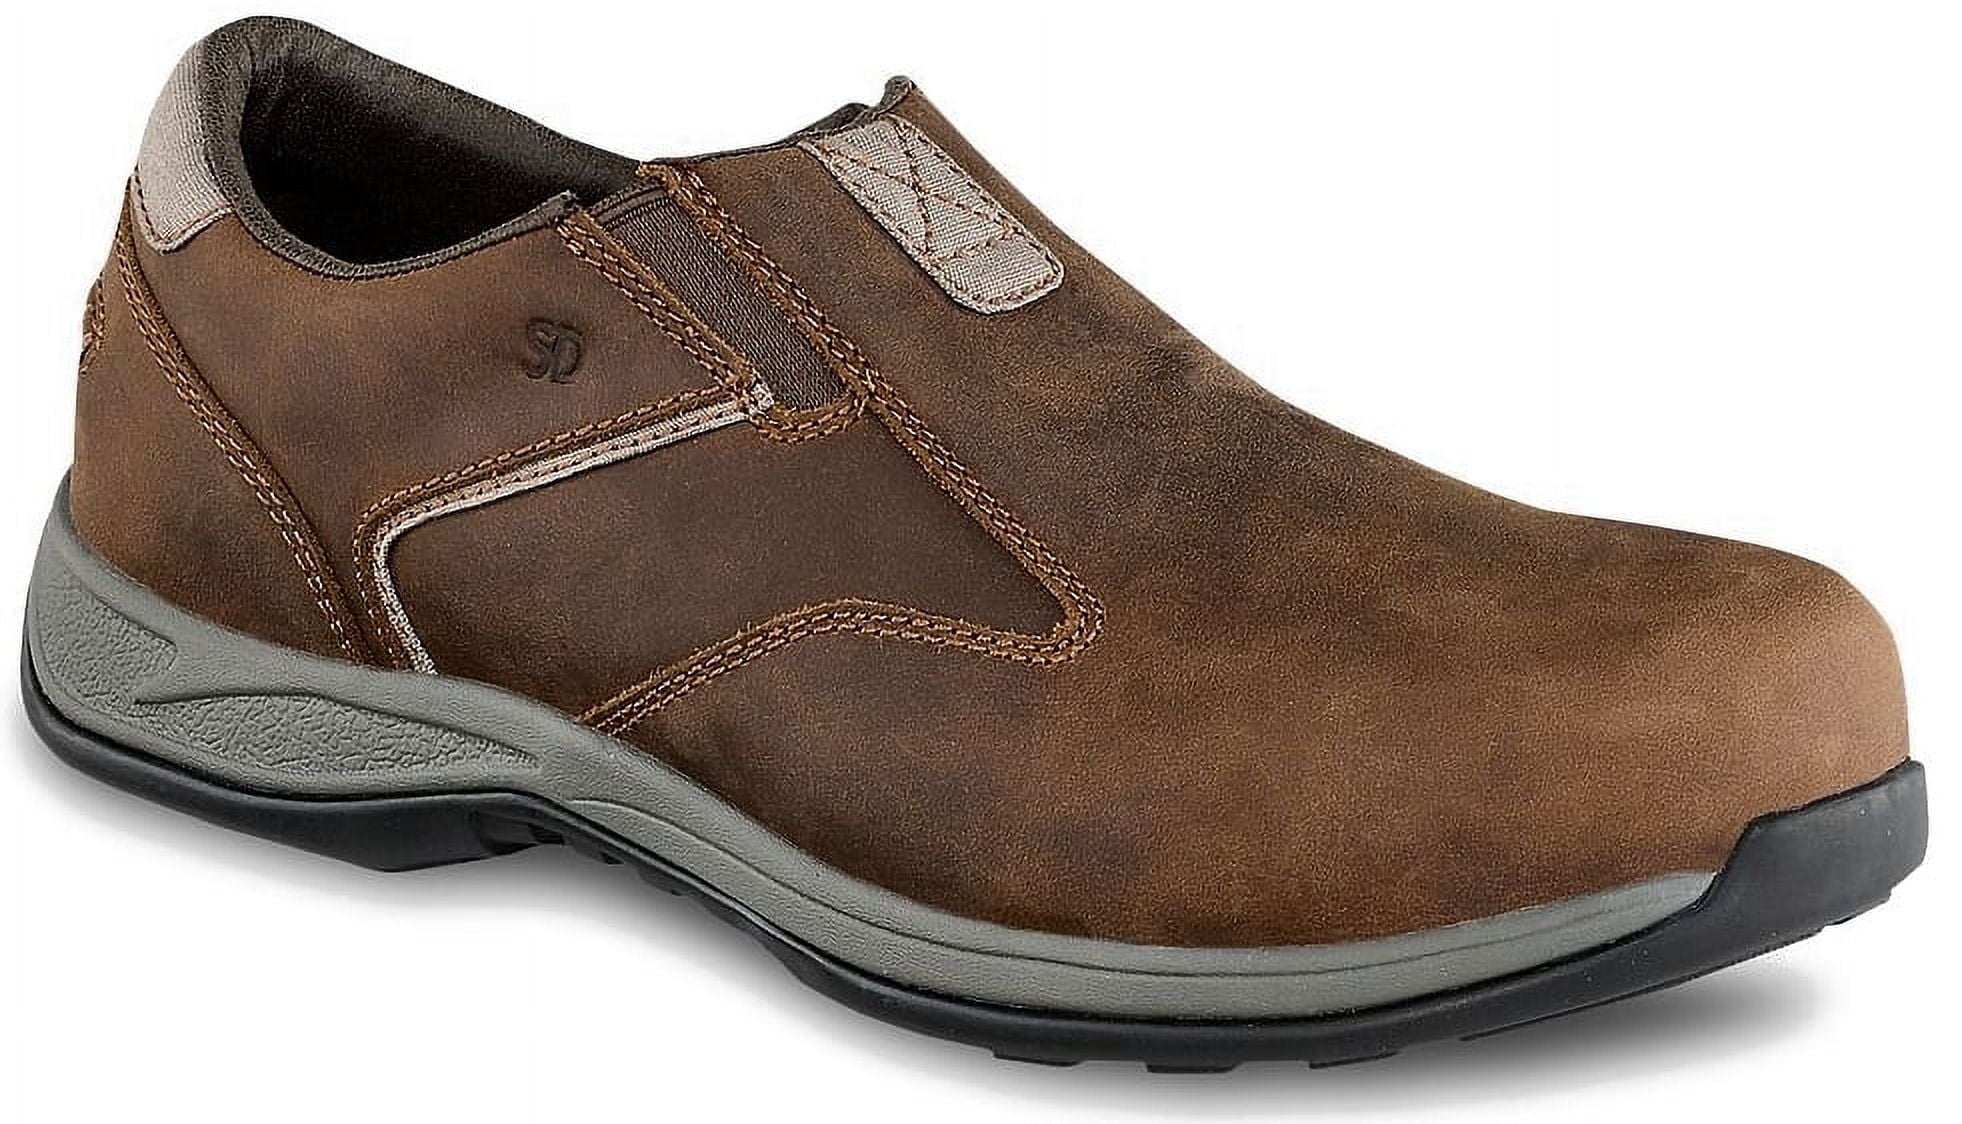 Red Wings MEN'S SAFETY TOE SLIP ON WORK SHOES - Style 6705 